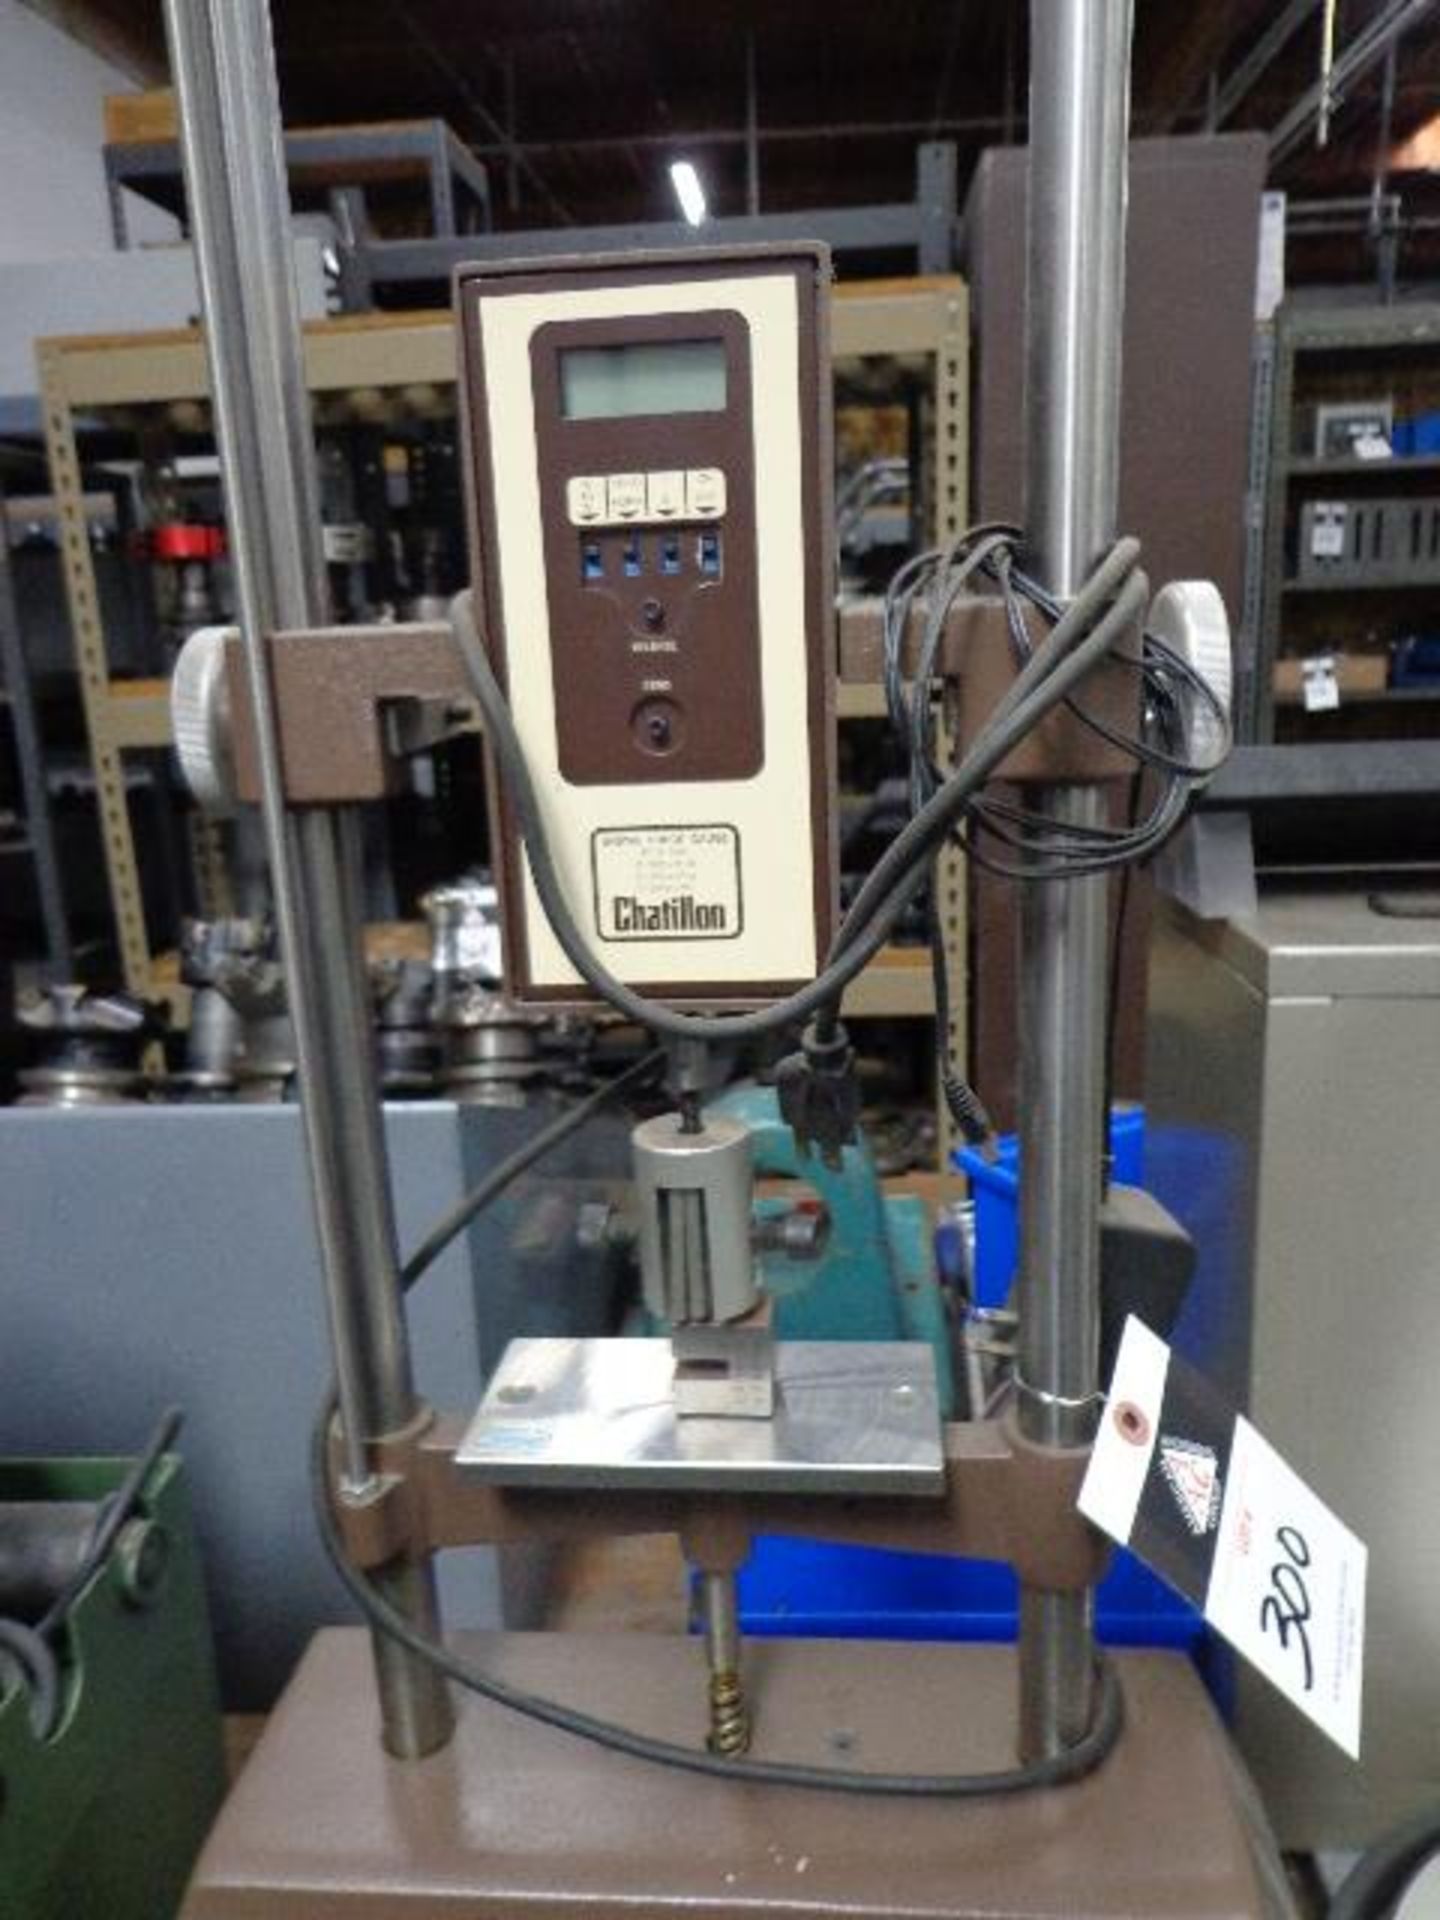 Chatillon UTSM Tencel Tester (SOLD AS-IS - NO WARRANTY) - Image 2 of 8